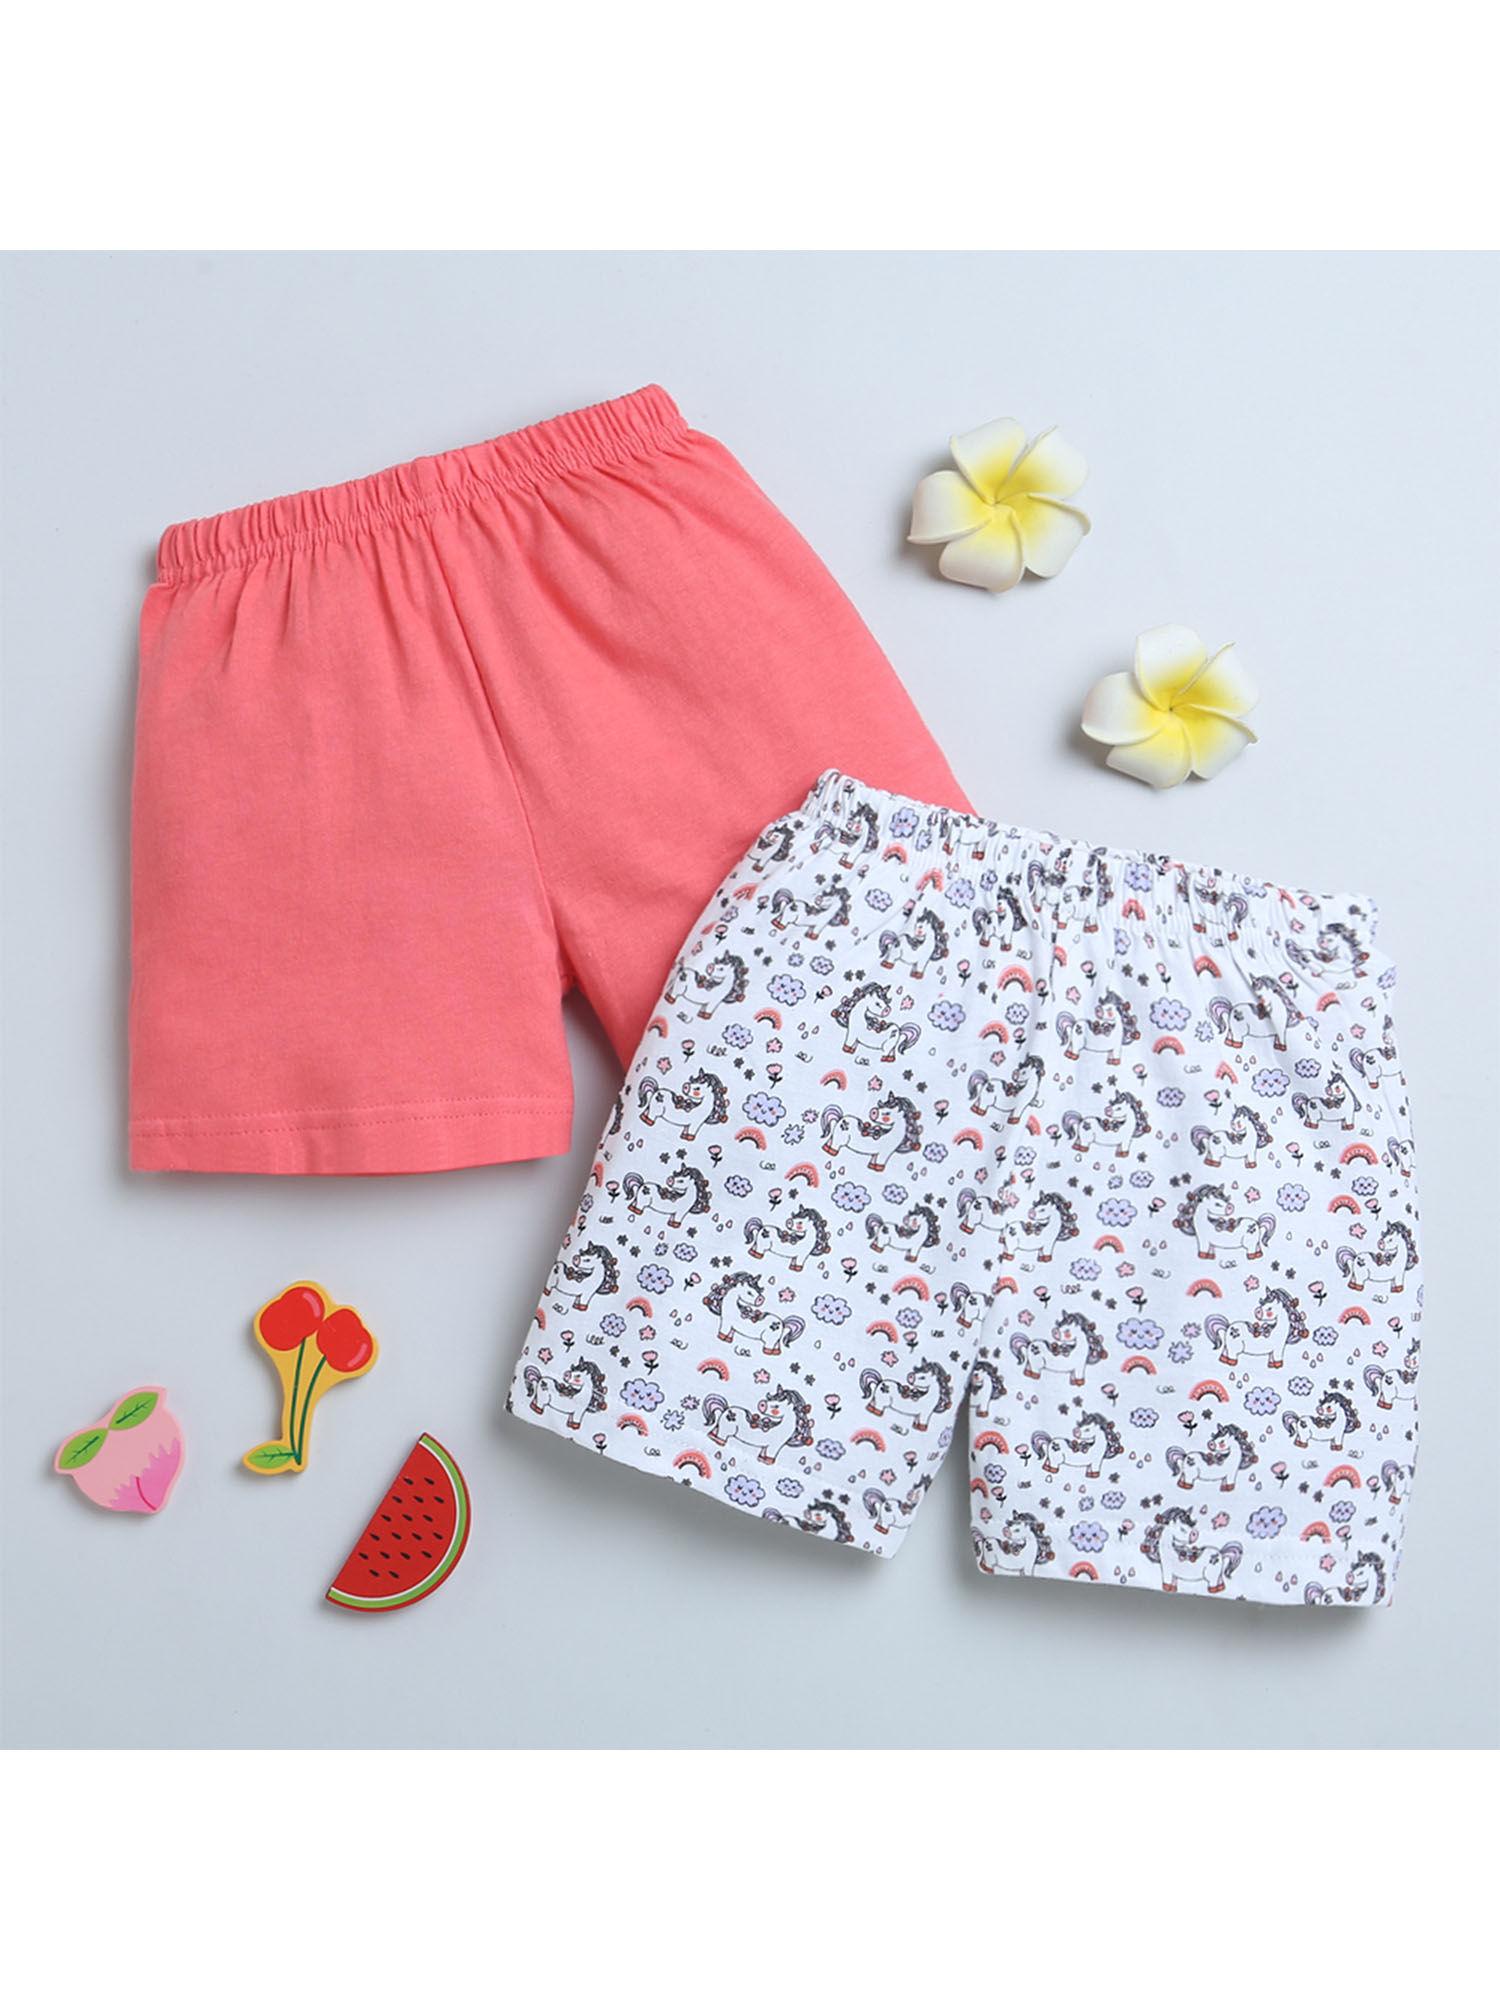 coral and white girls shorts (set of 2)